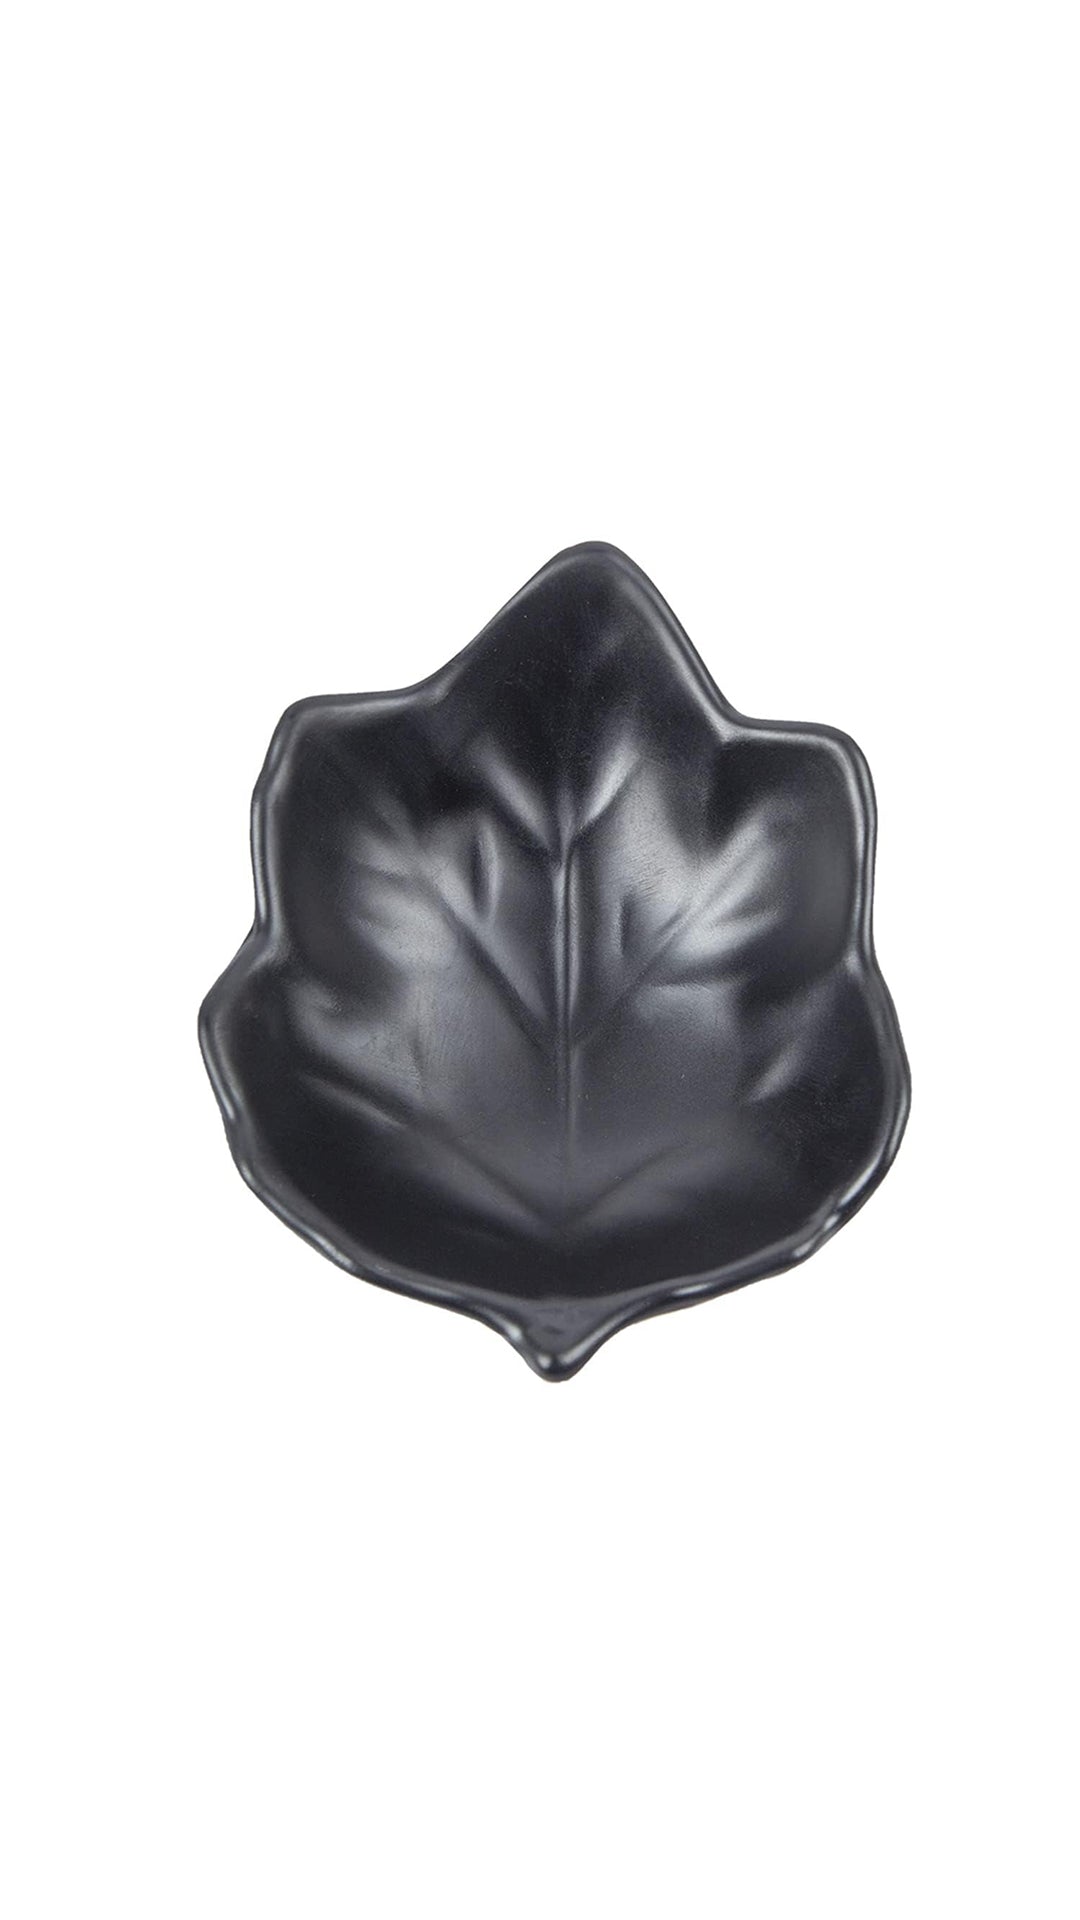 "Indulge in Style: Melamine Leaf-Shaped Chutney Dip Bowl in Sleek Matte Black – Perfect for Parties or Everyday Snack Time. Durable, Elegant, and Unbreakable."